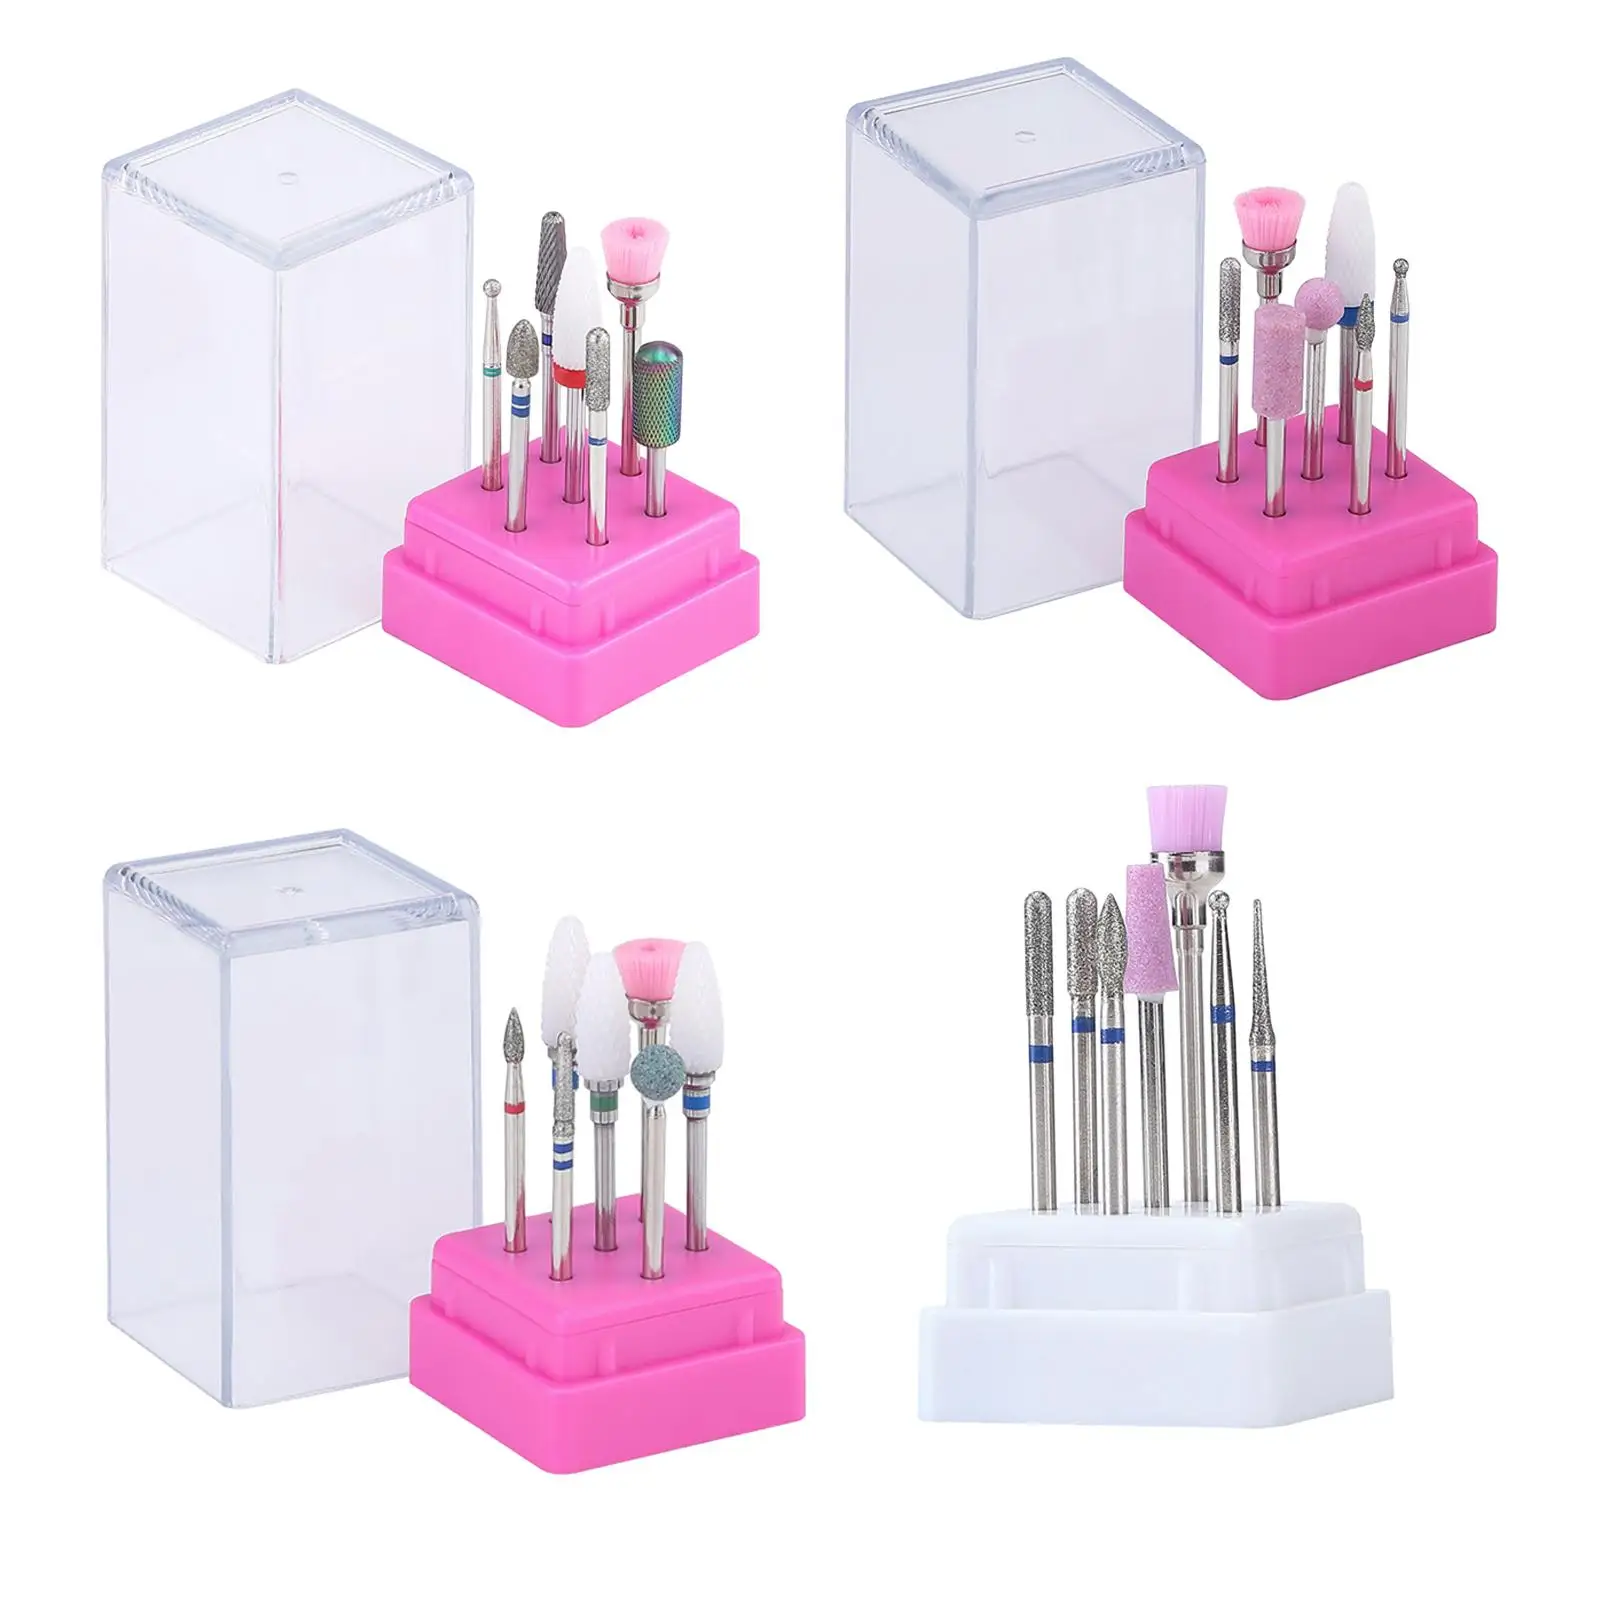 Electric Nail Drill Bits Kit with Holder Box 7Pcs Polishing File Grinding Heads for Pedicure Manicure Nail Polish Manicurists